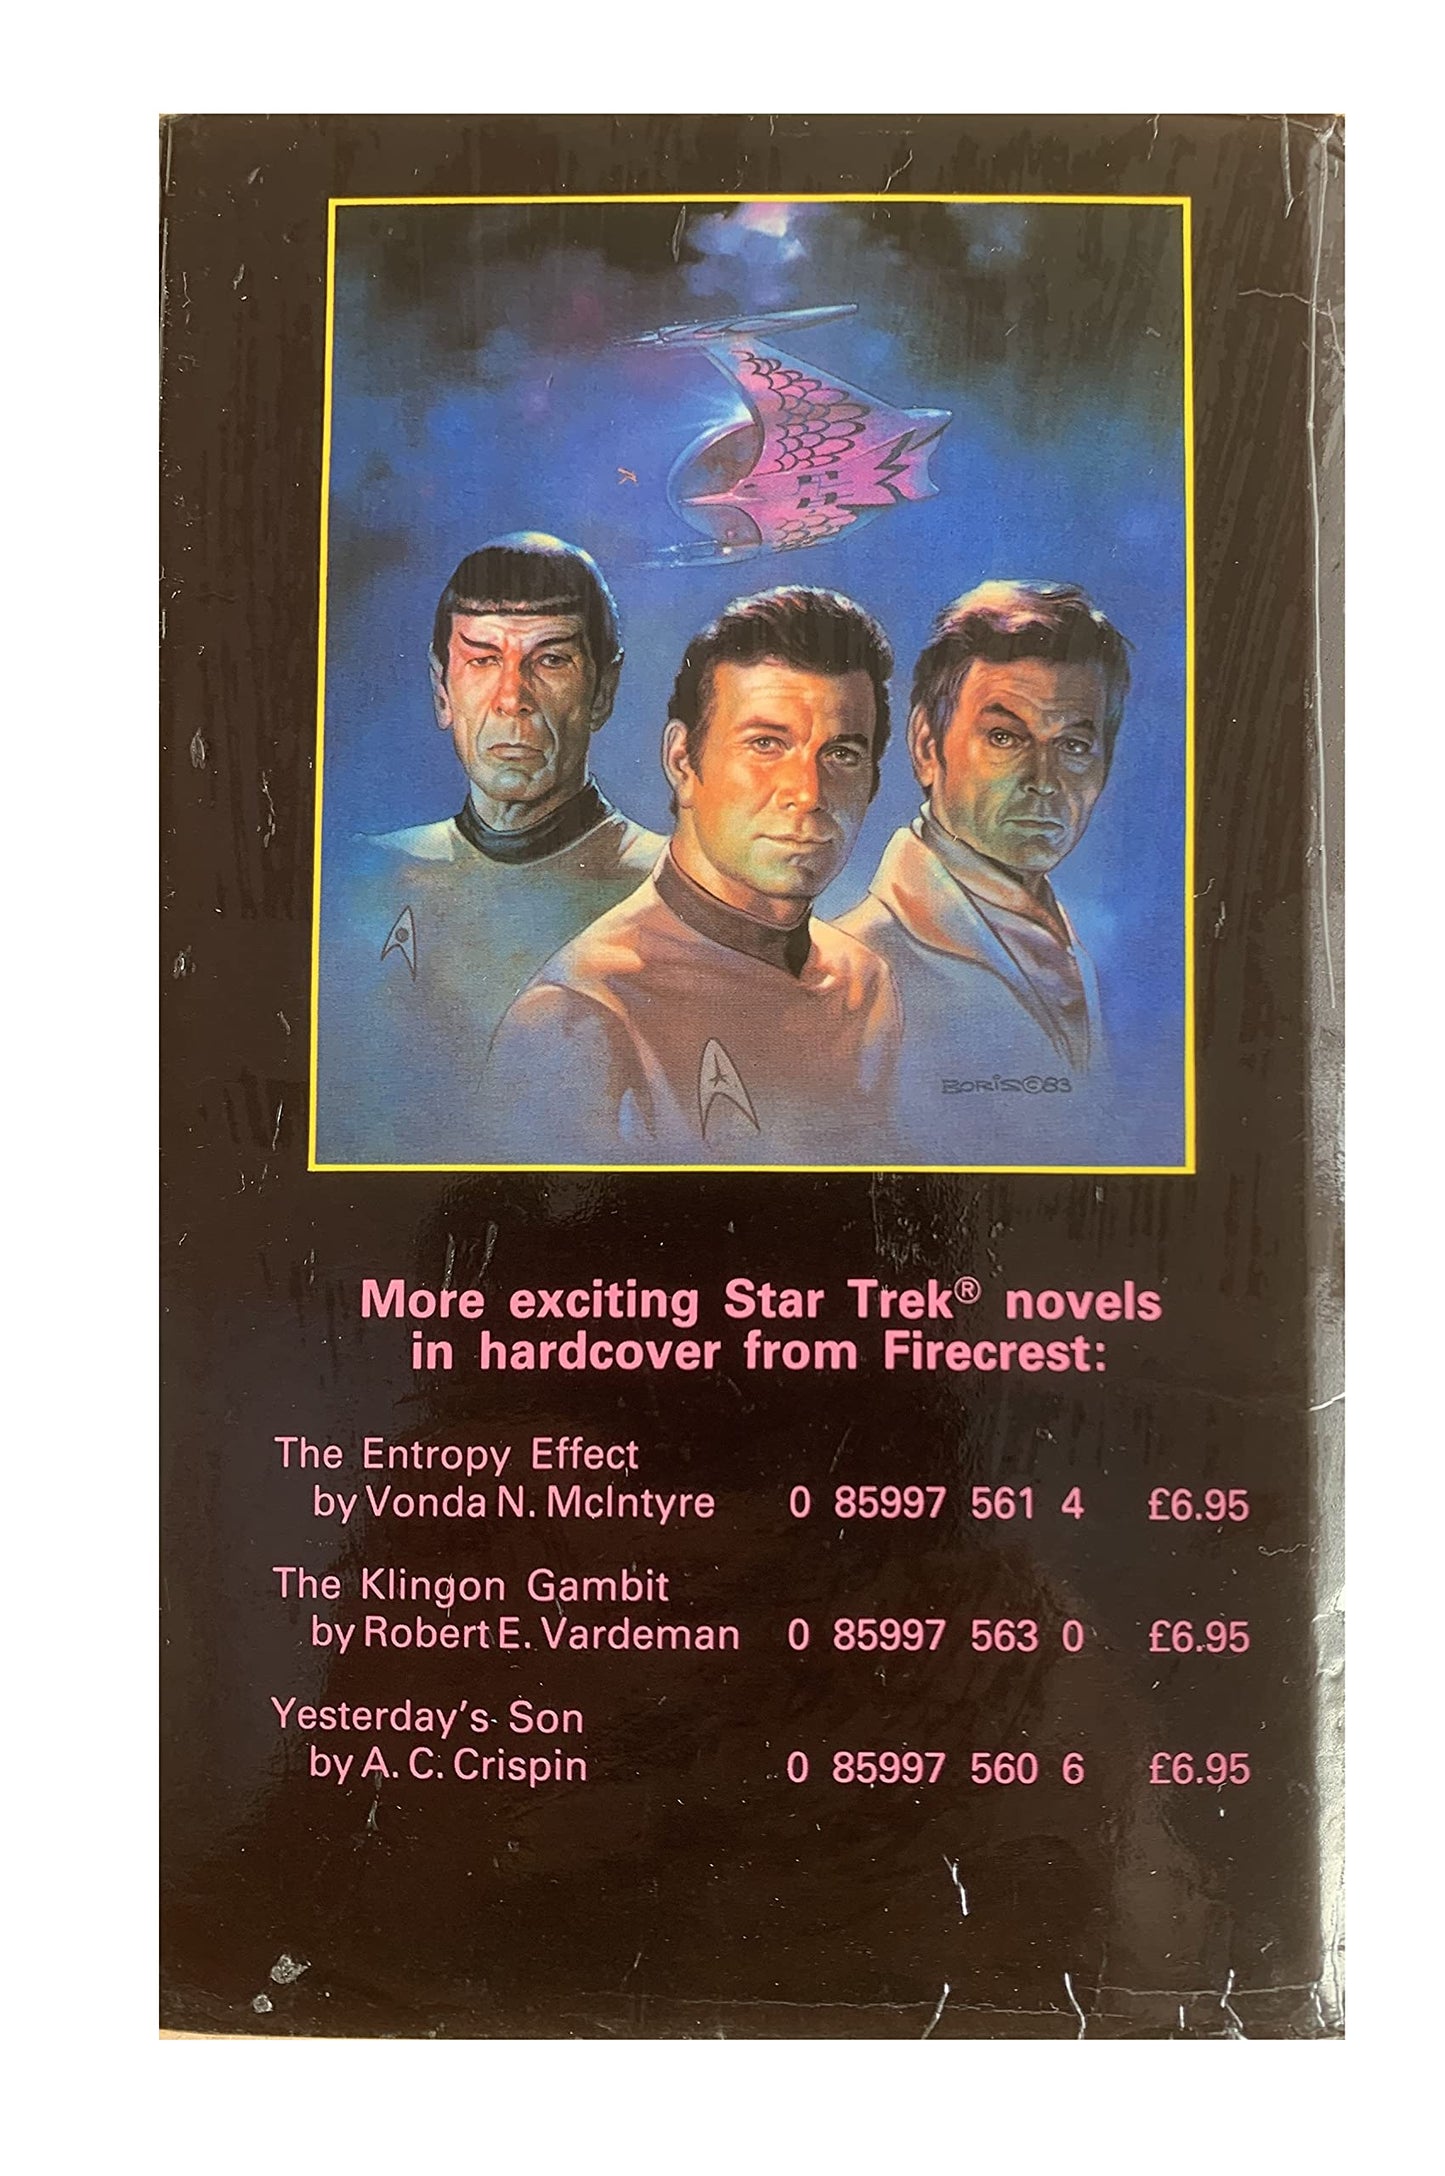 Vintage 1983 Star Trek Web Of The Romulans - Hard Back Book By M.S. Murdock - Former Library Book